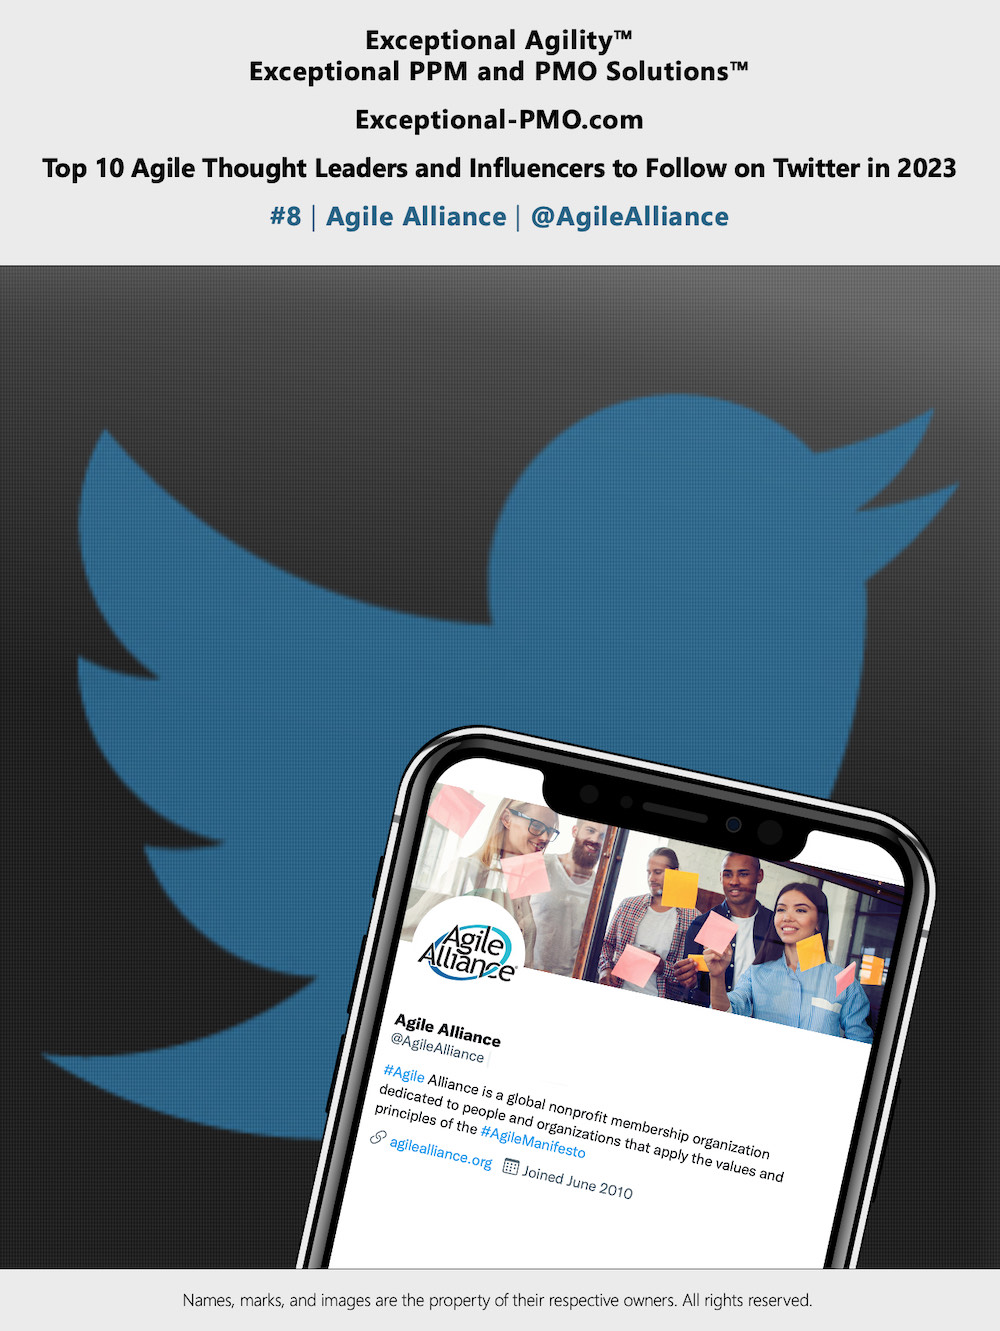 Exceptional-PMO_com - Top 10 Agile Thought Leaders and Influencers to Follow on Twitter in 2023 - 08 - lr - sq